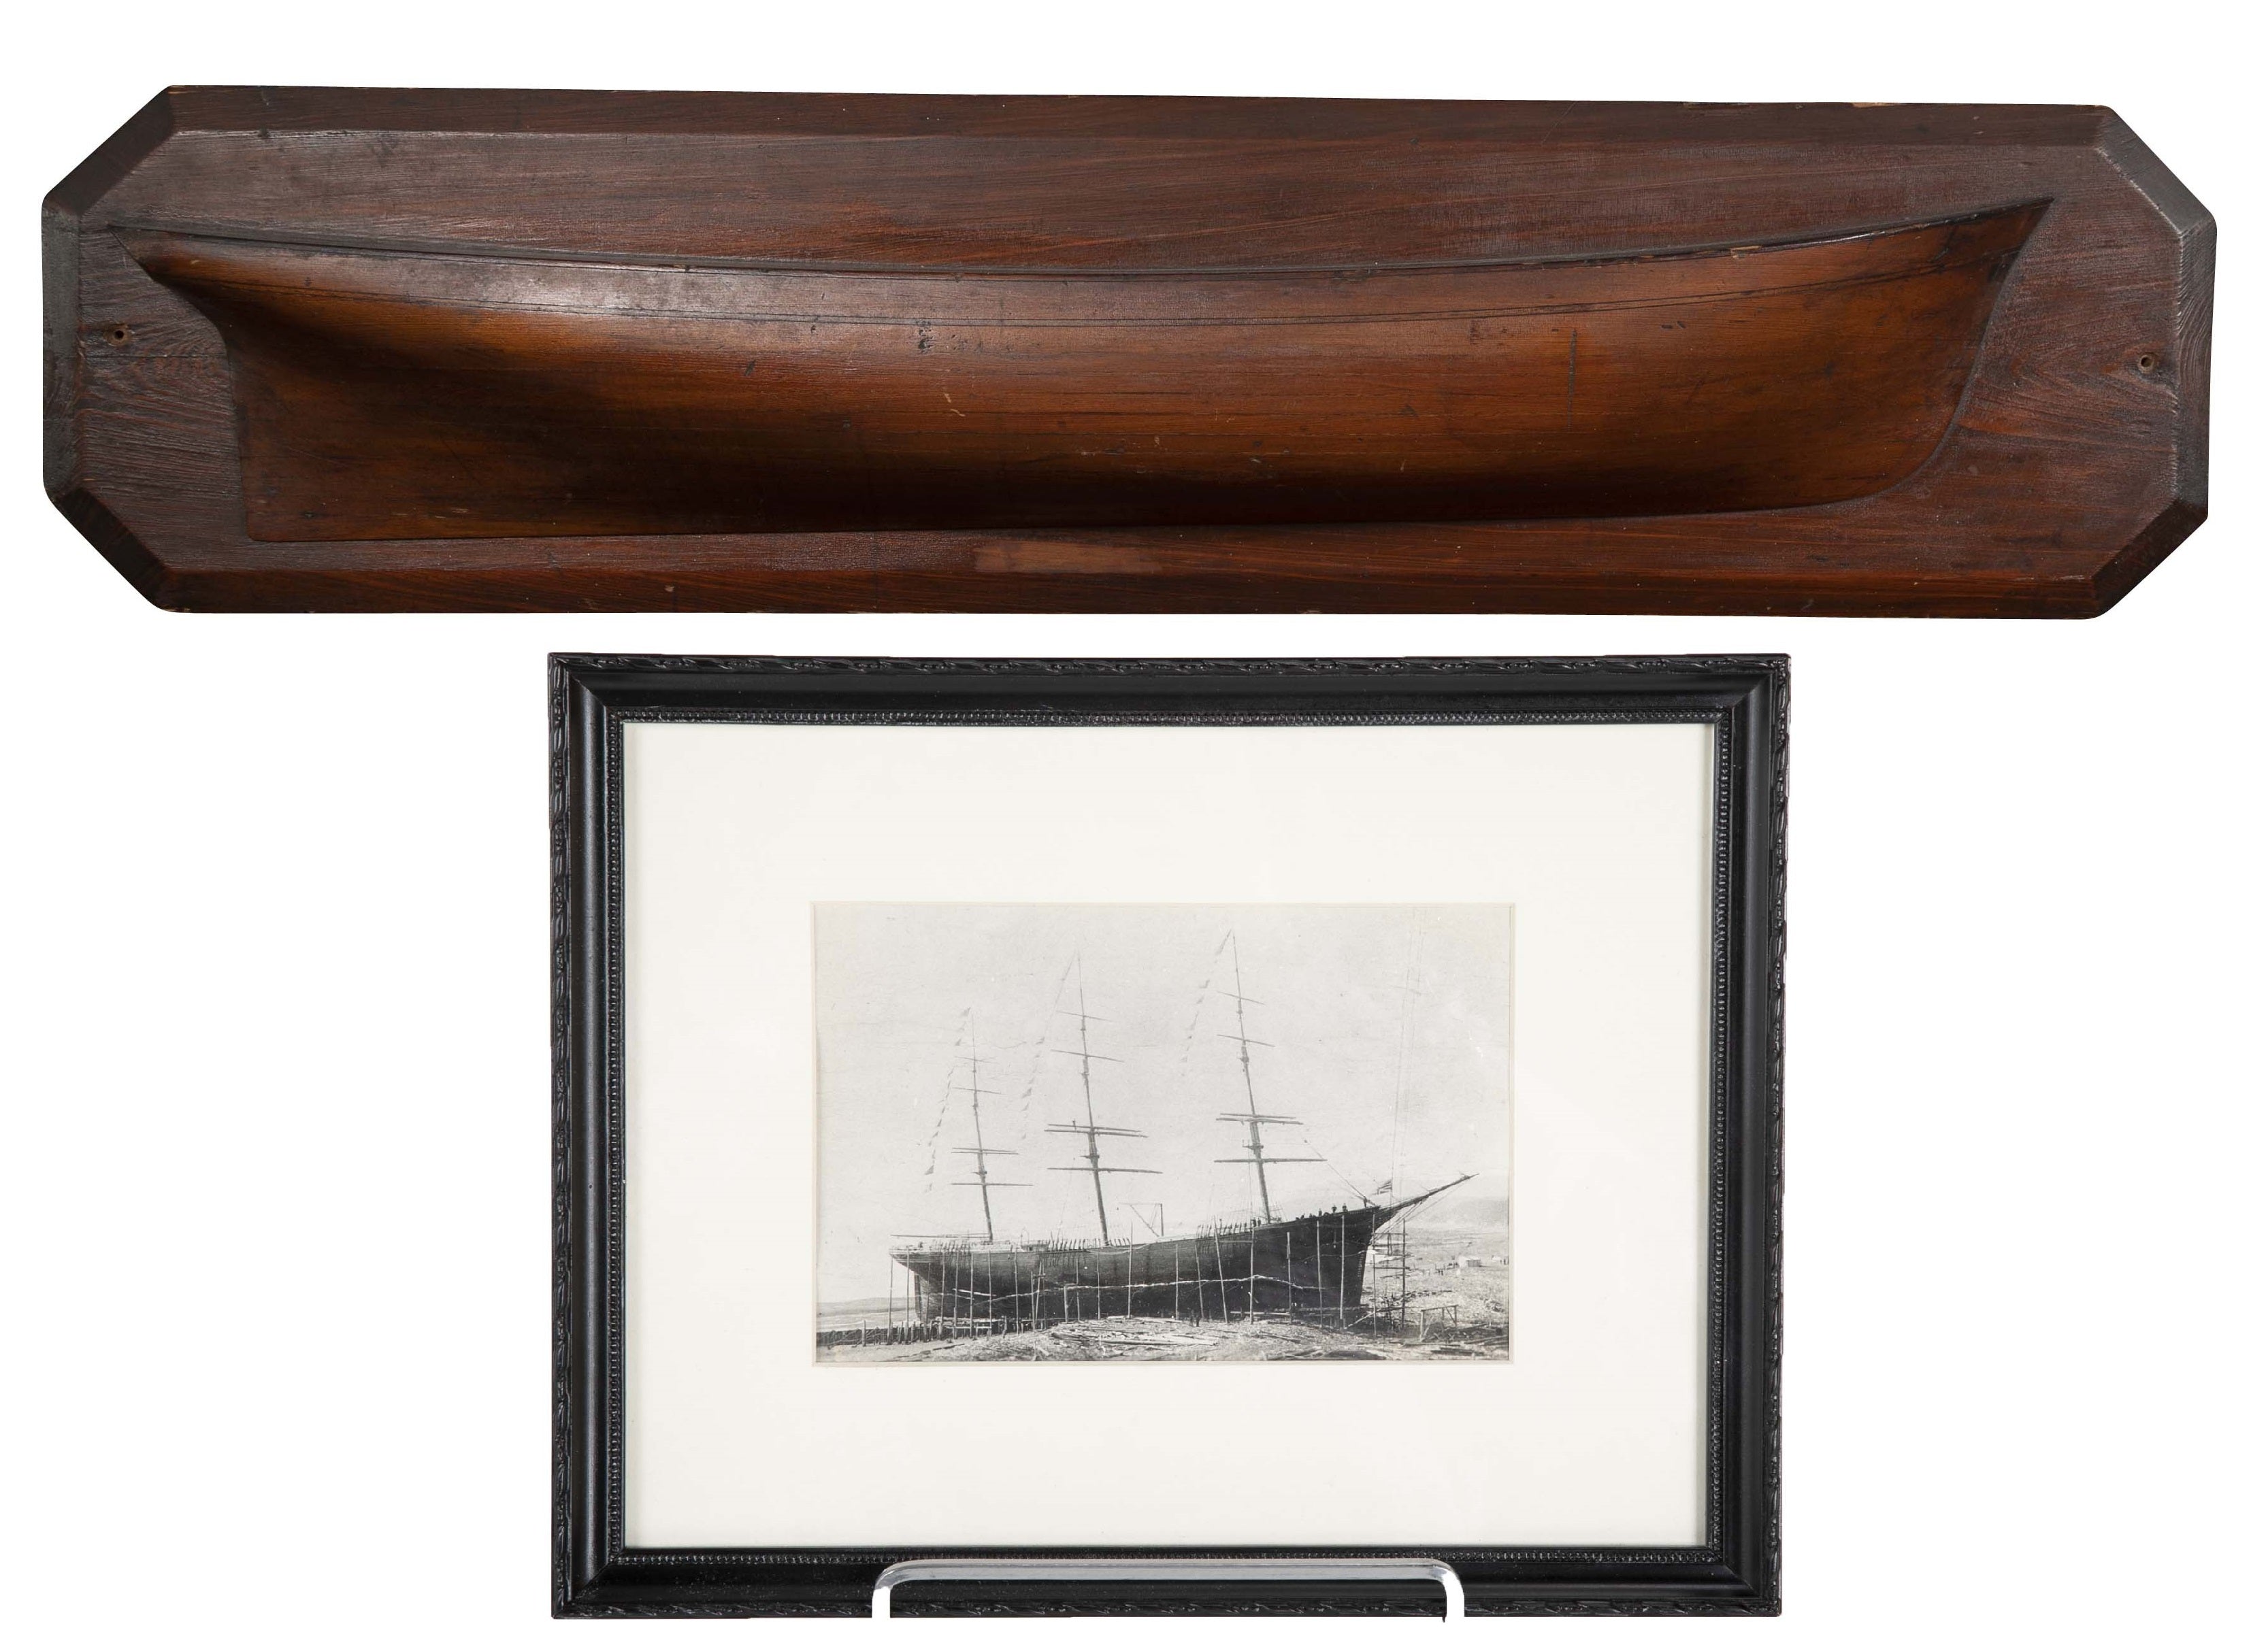 Mounted Builder's Half Hull Model of the Ship "George T. Hay"